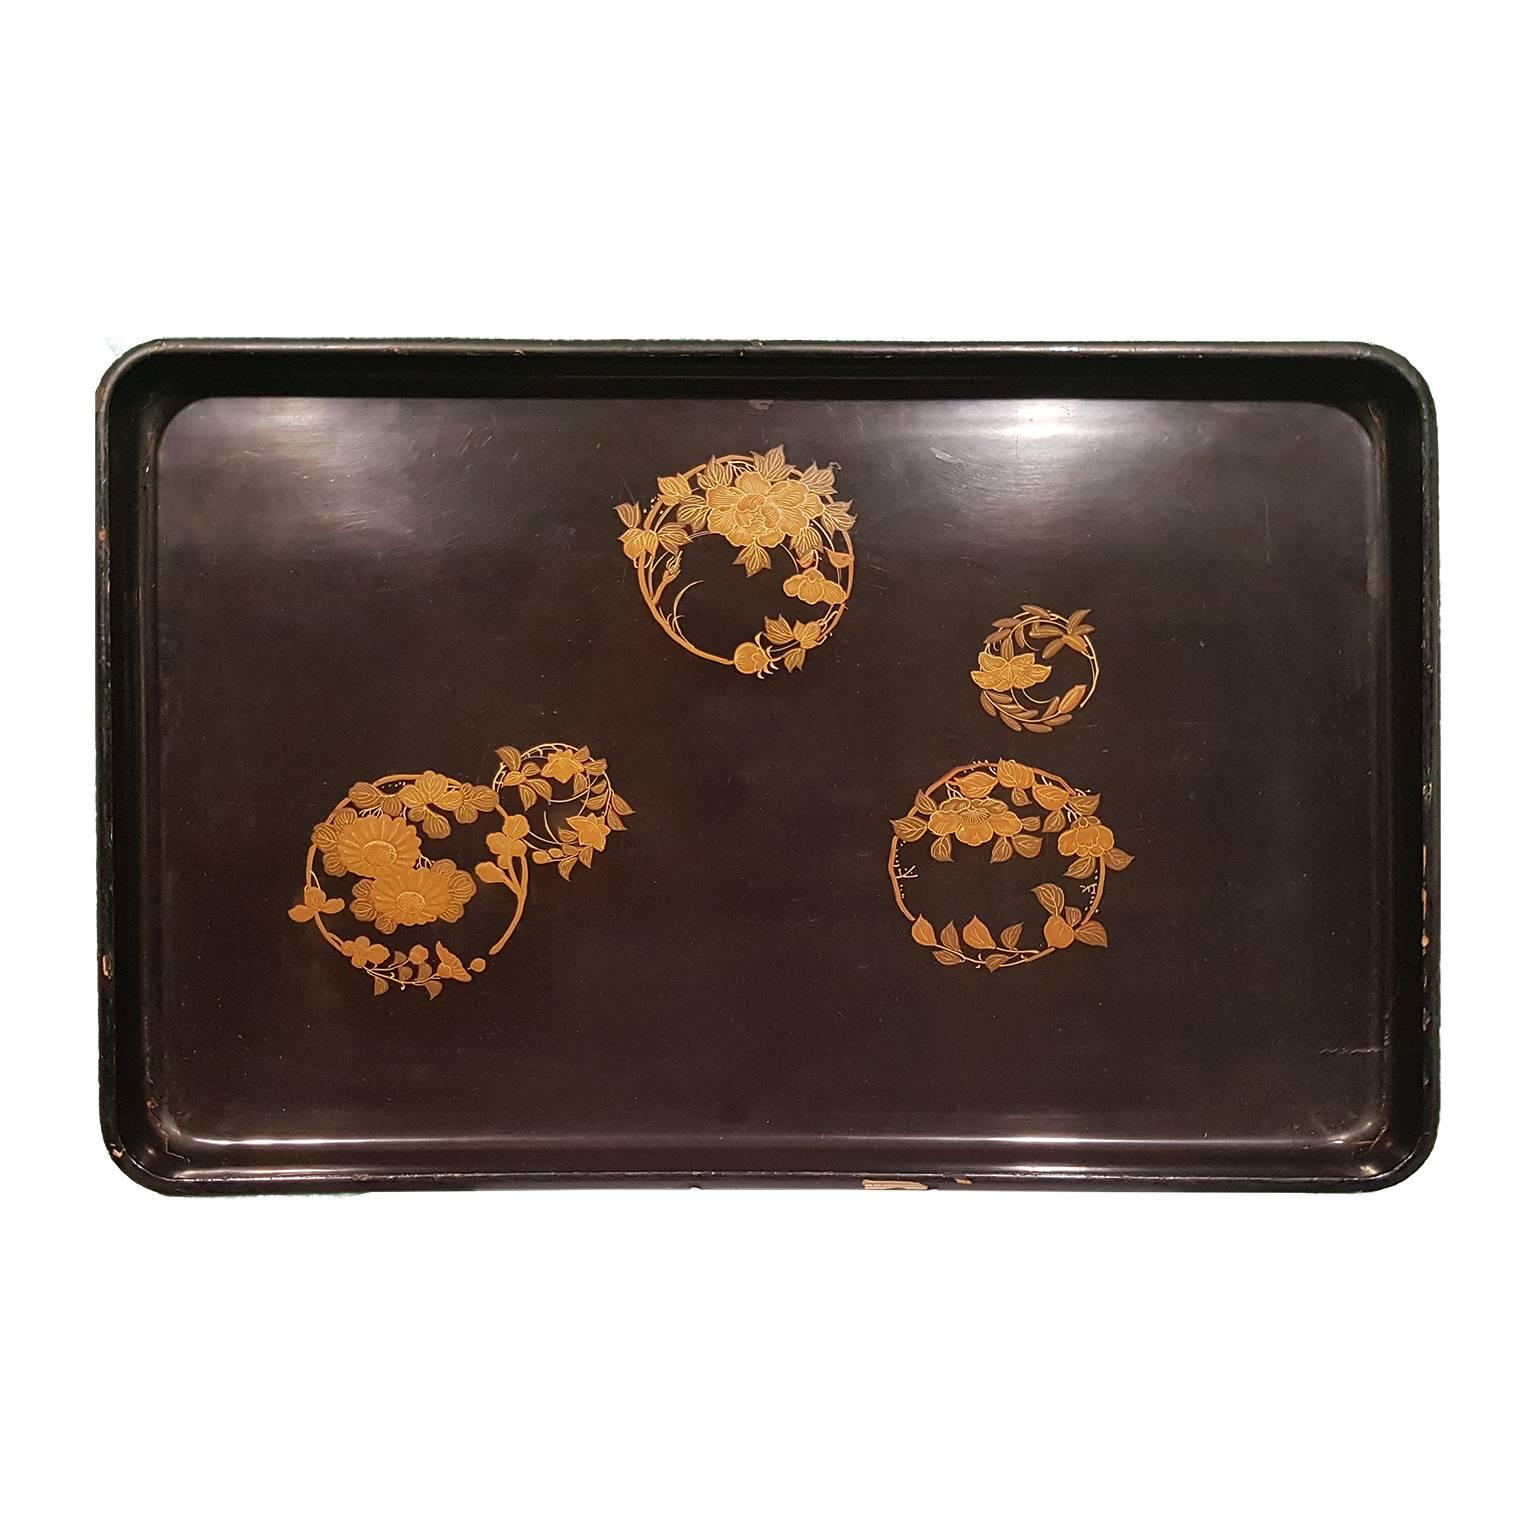 Beautiful black Japanese wooden tray with some polychrome and gold decorations in front side.
This product is located and shipped from Italy.